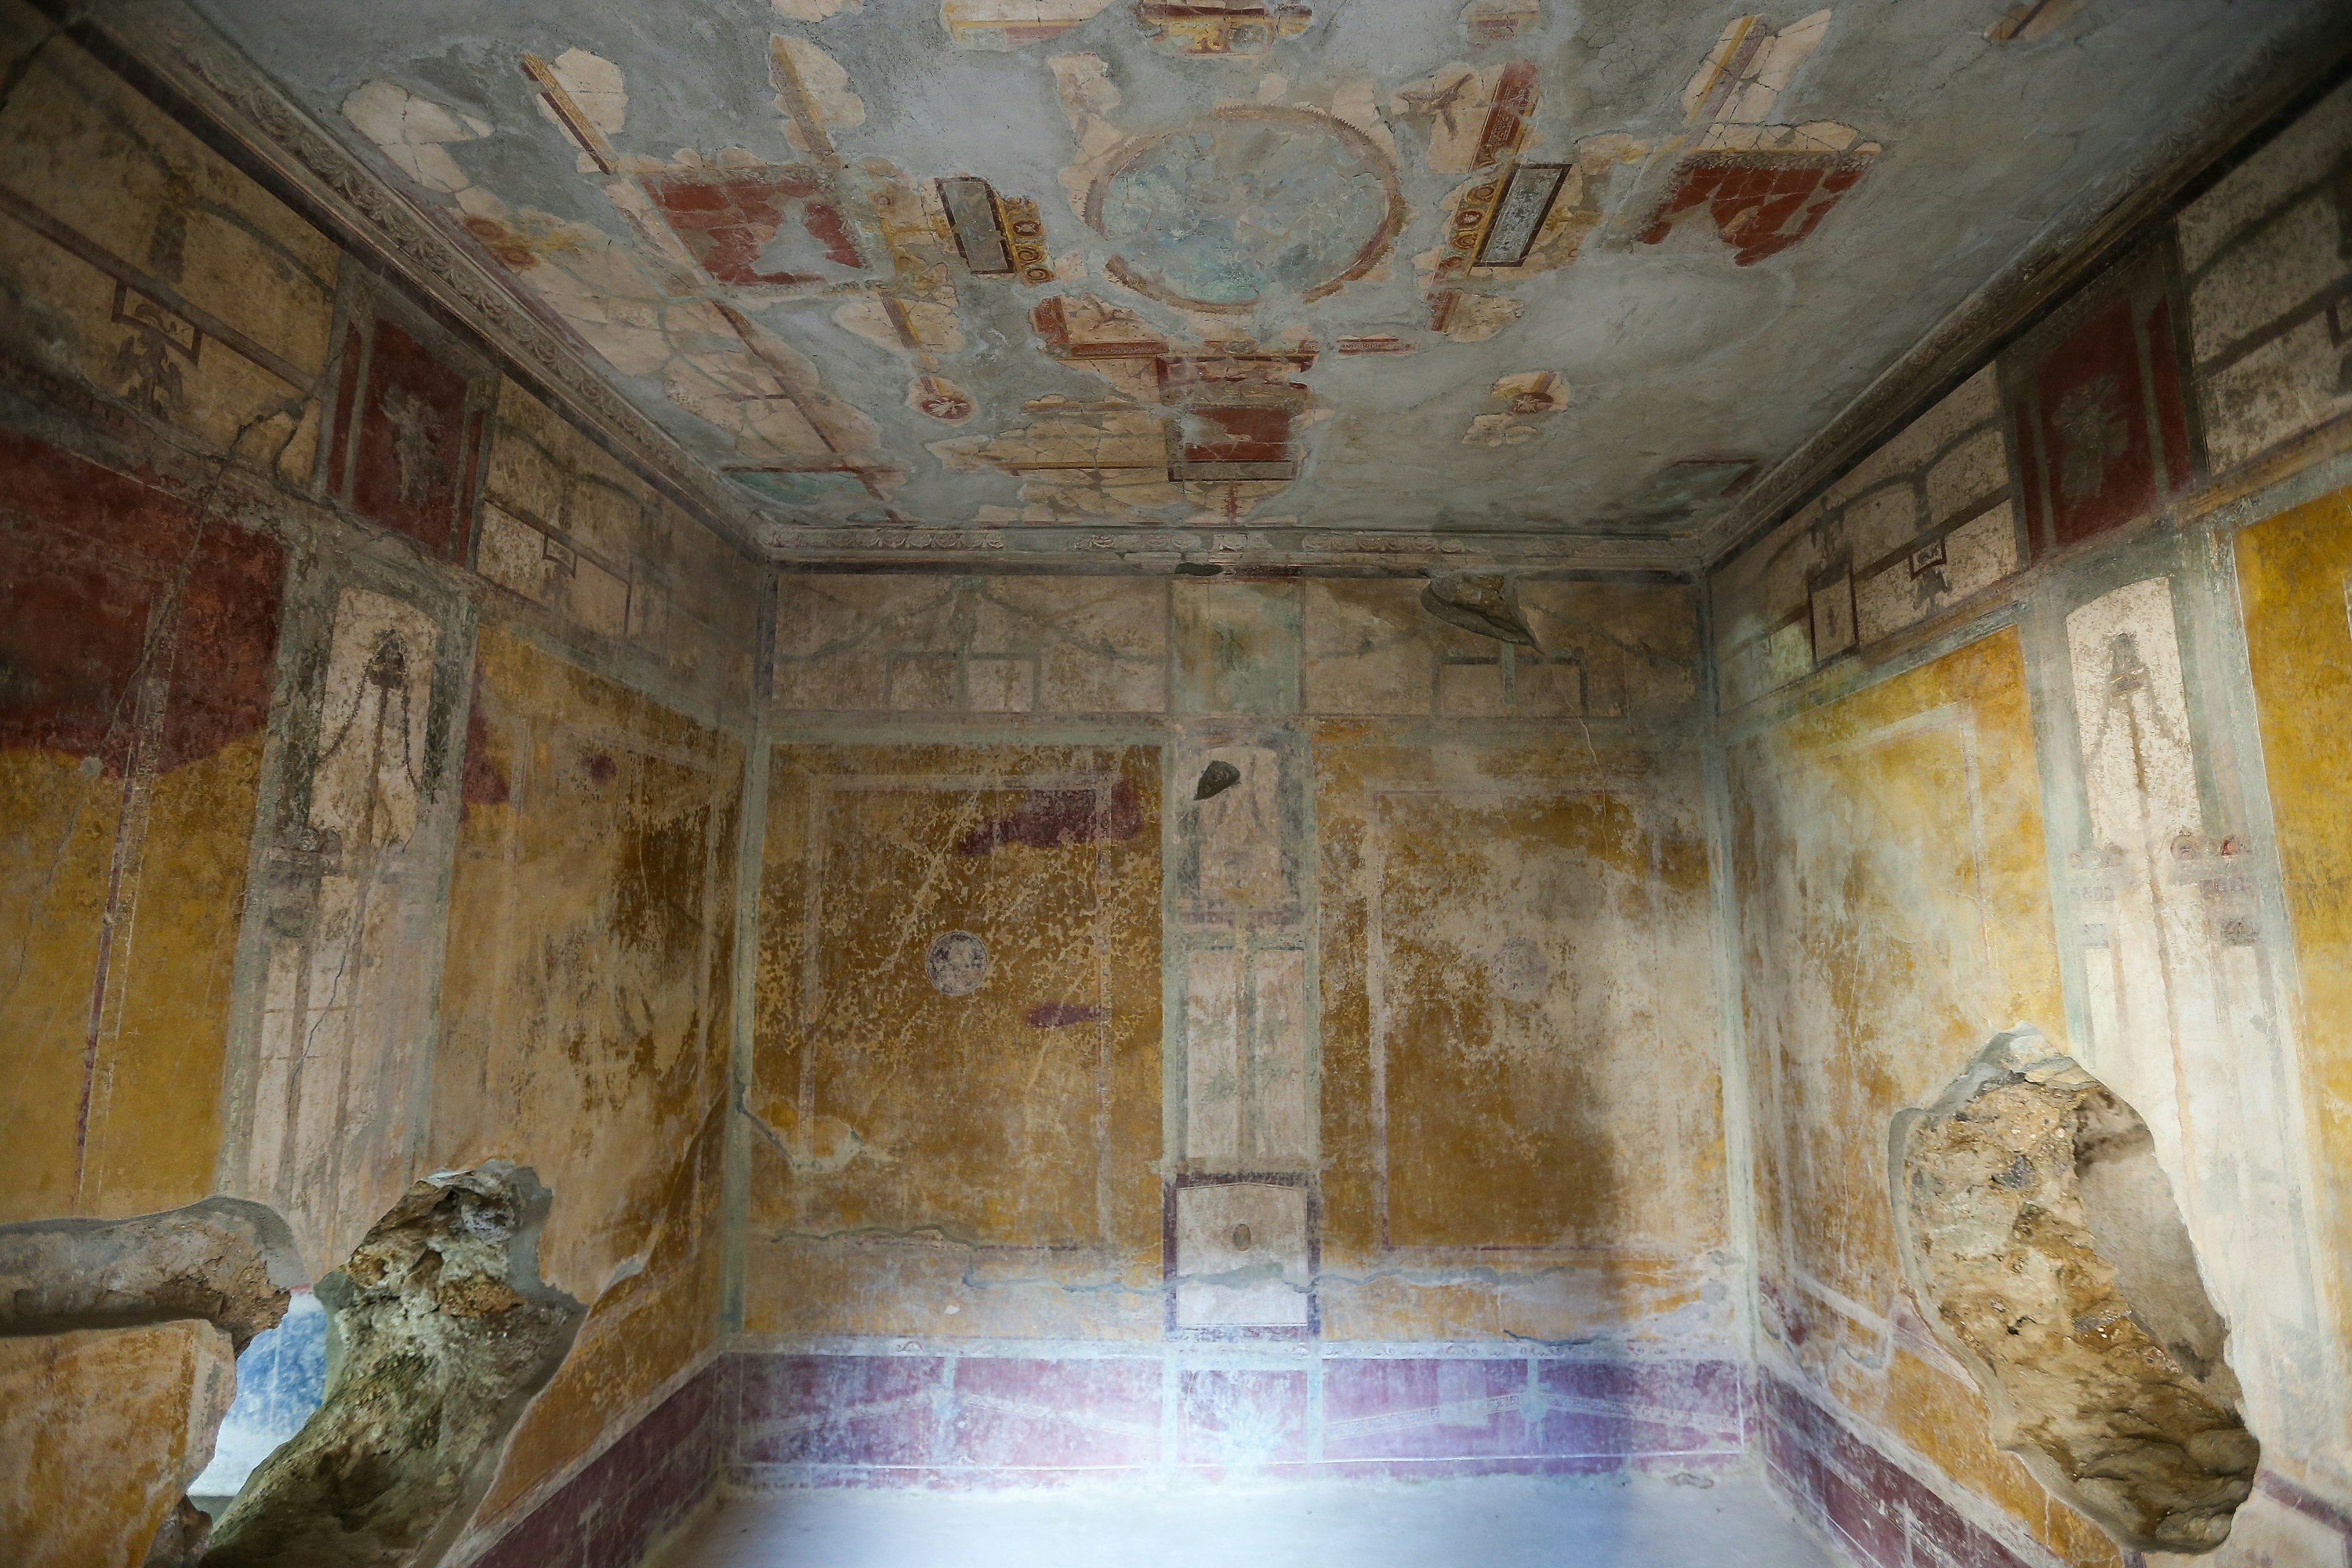 A view of a room, completely frescoed, in Pompeii's House of Lovers